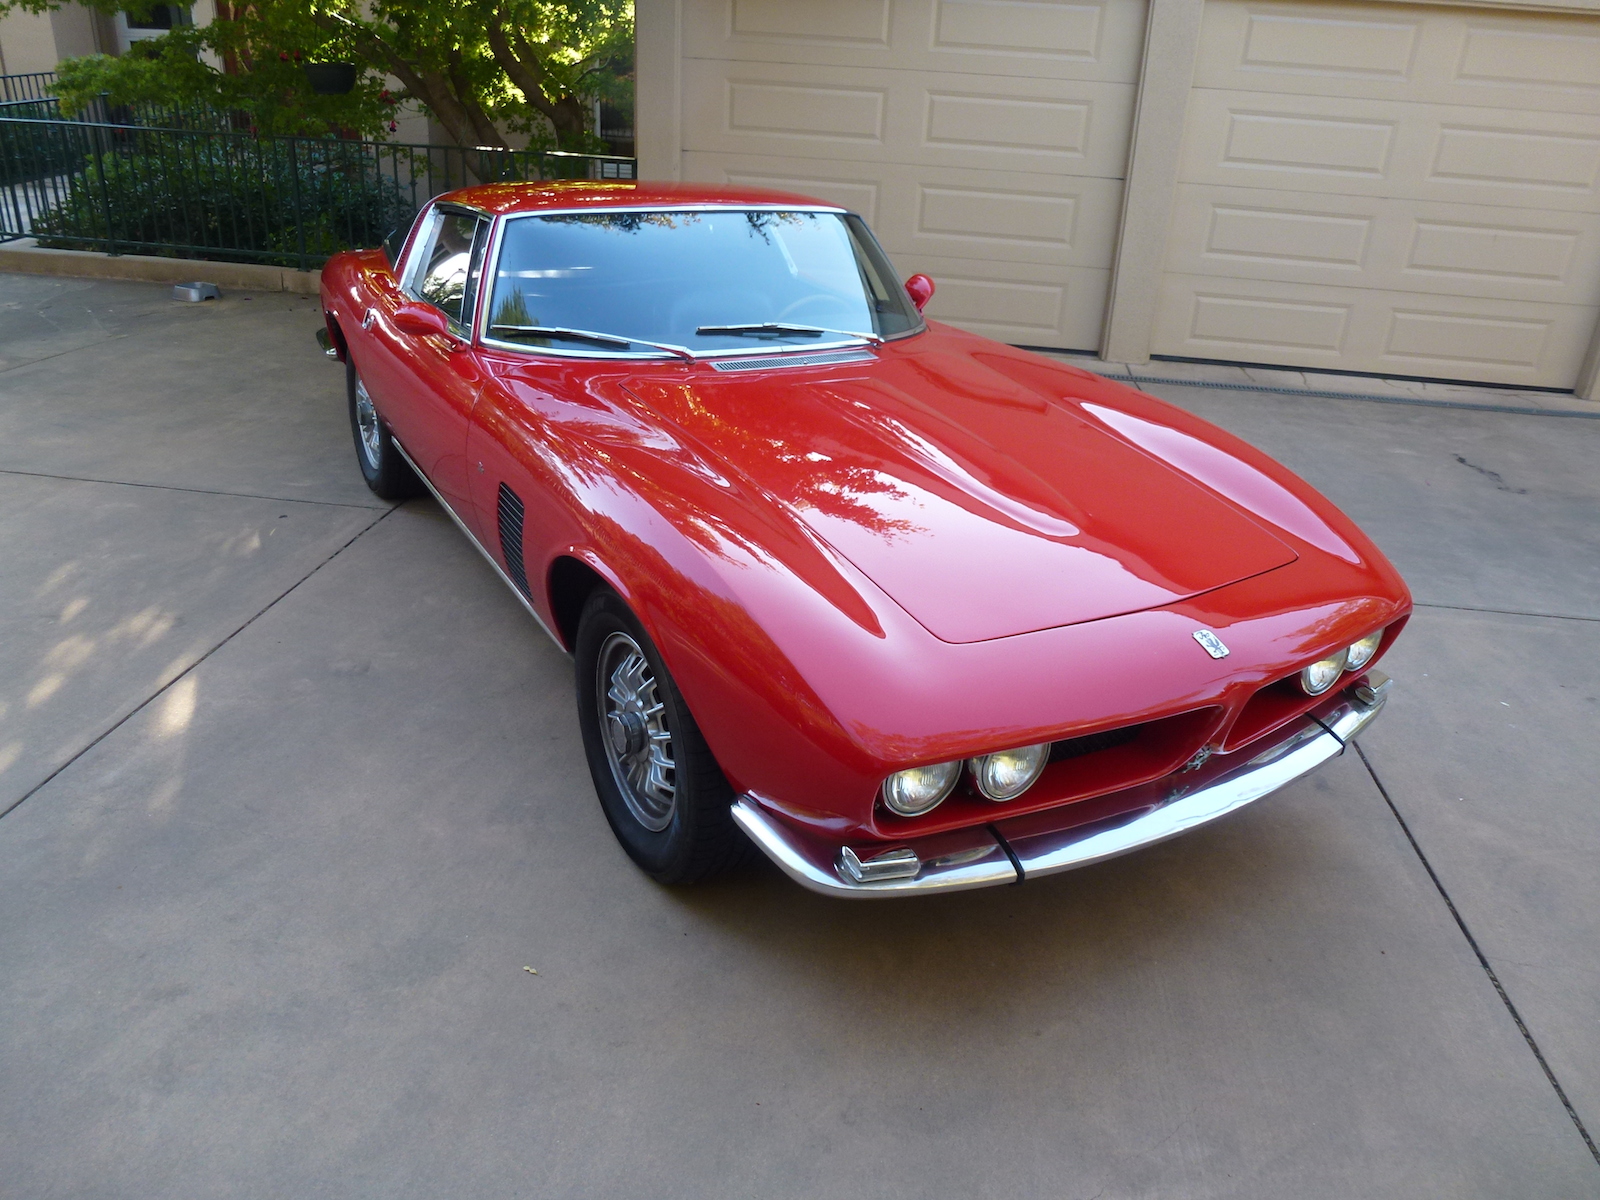 The Iso Grifo Is Gone - Sellers Remorse - The Video